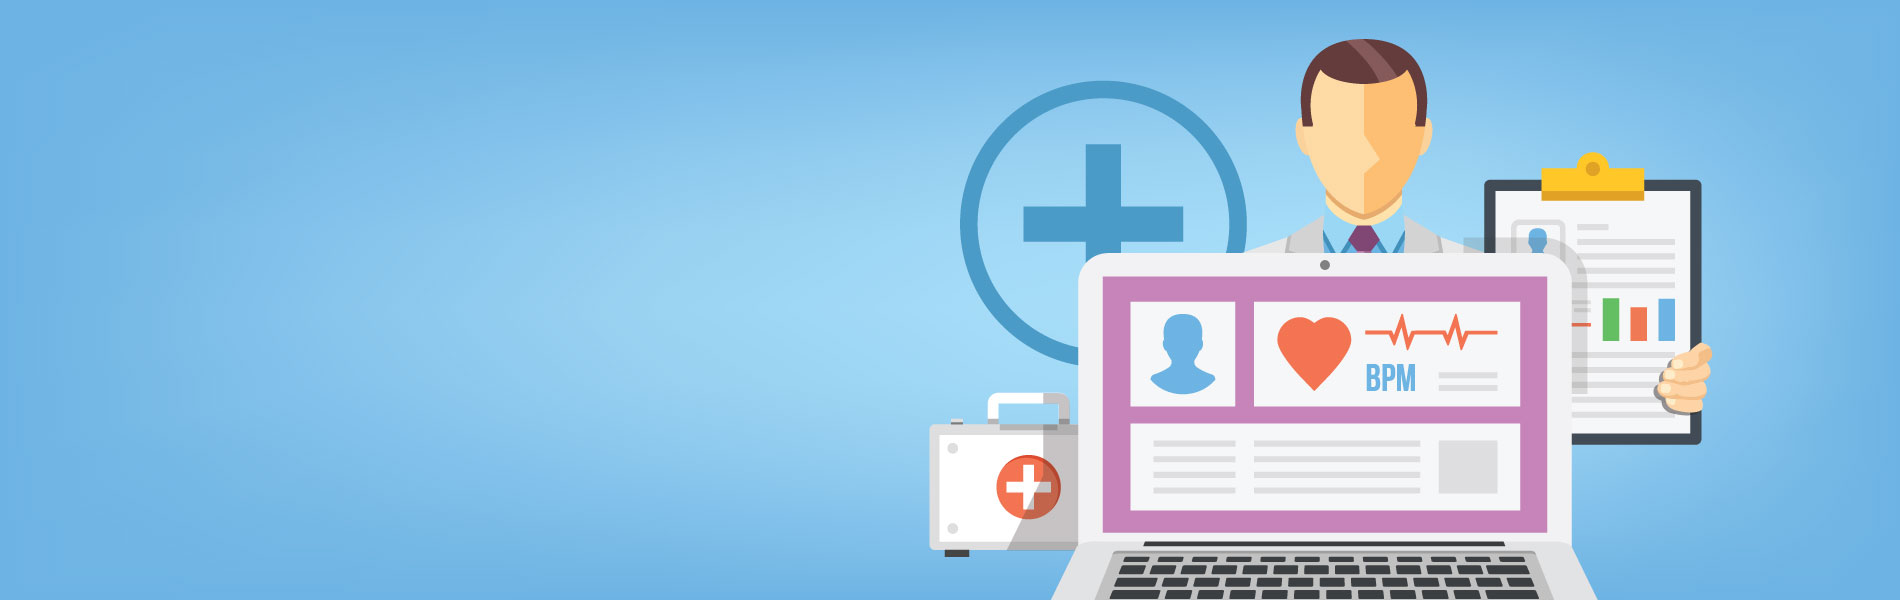 benefits of patient portal: an illustration of a patient portal feature a screen, a doctor, and a chart